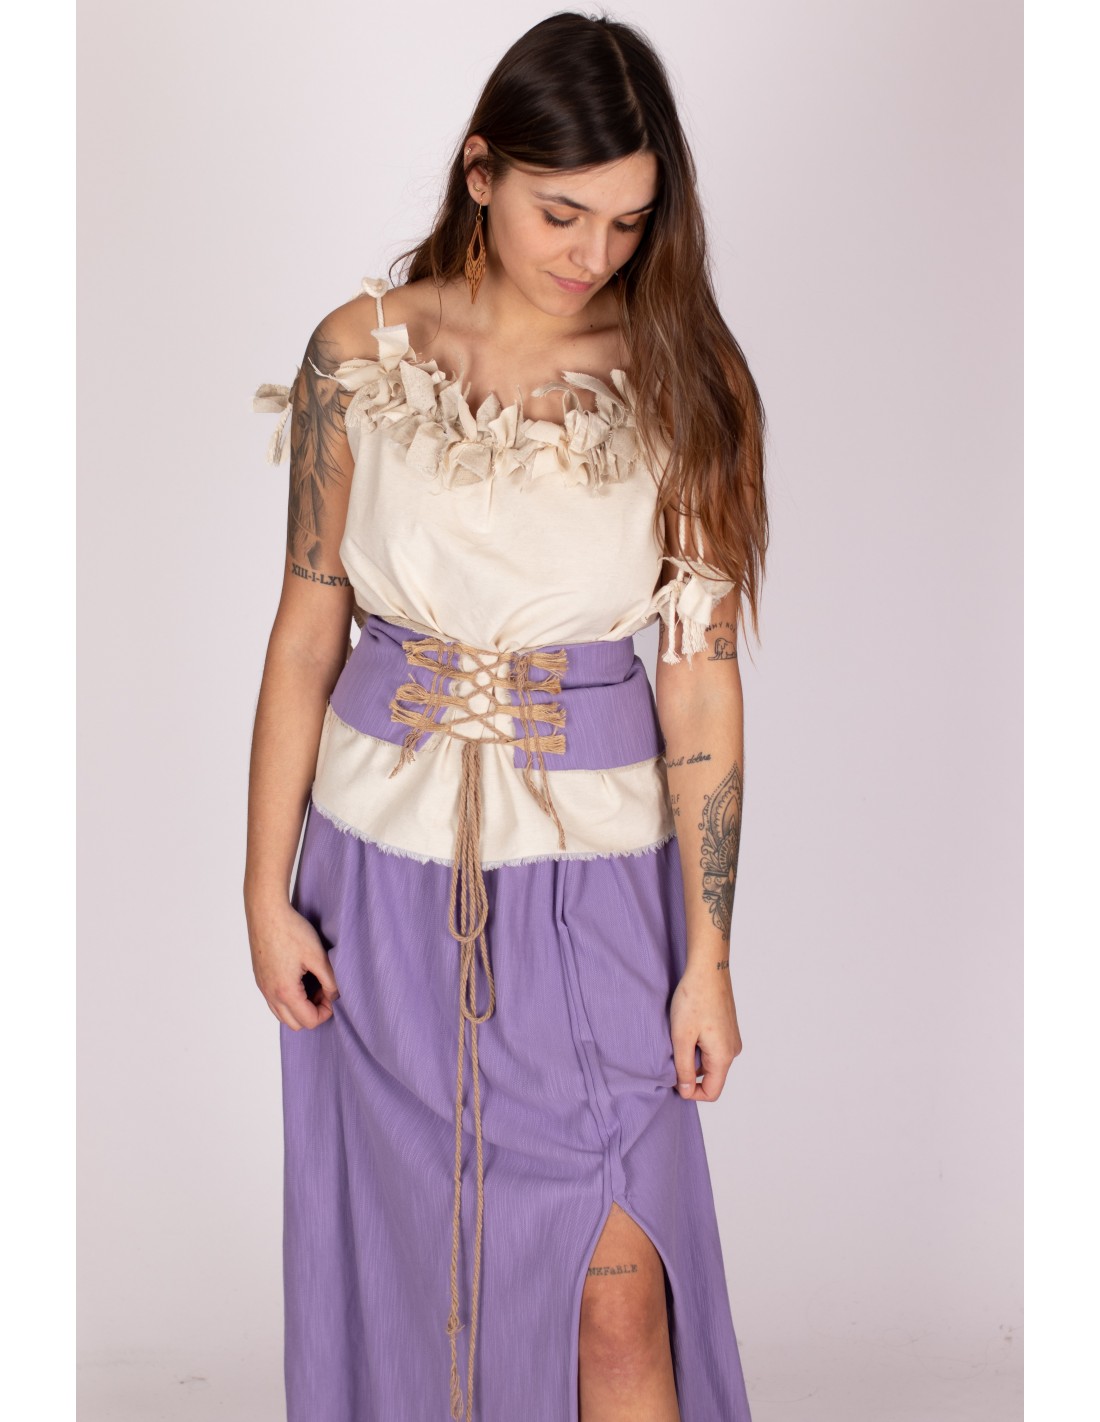 Medieval blouse with fringe